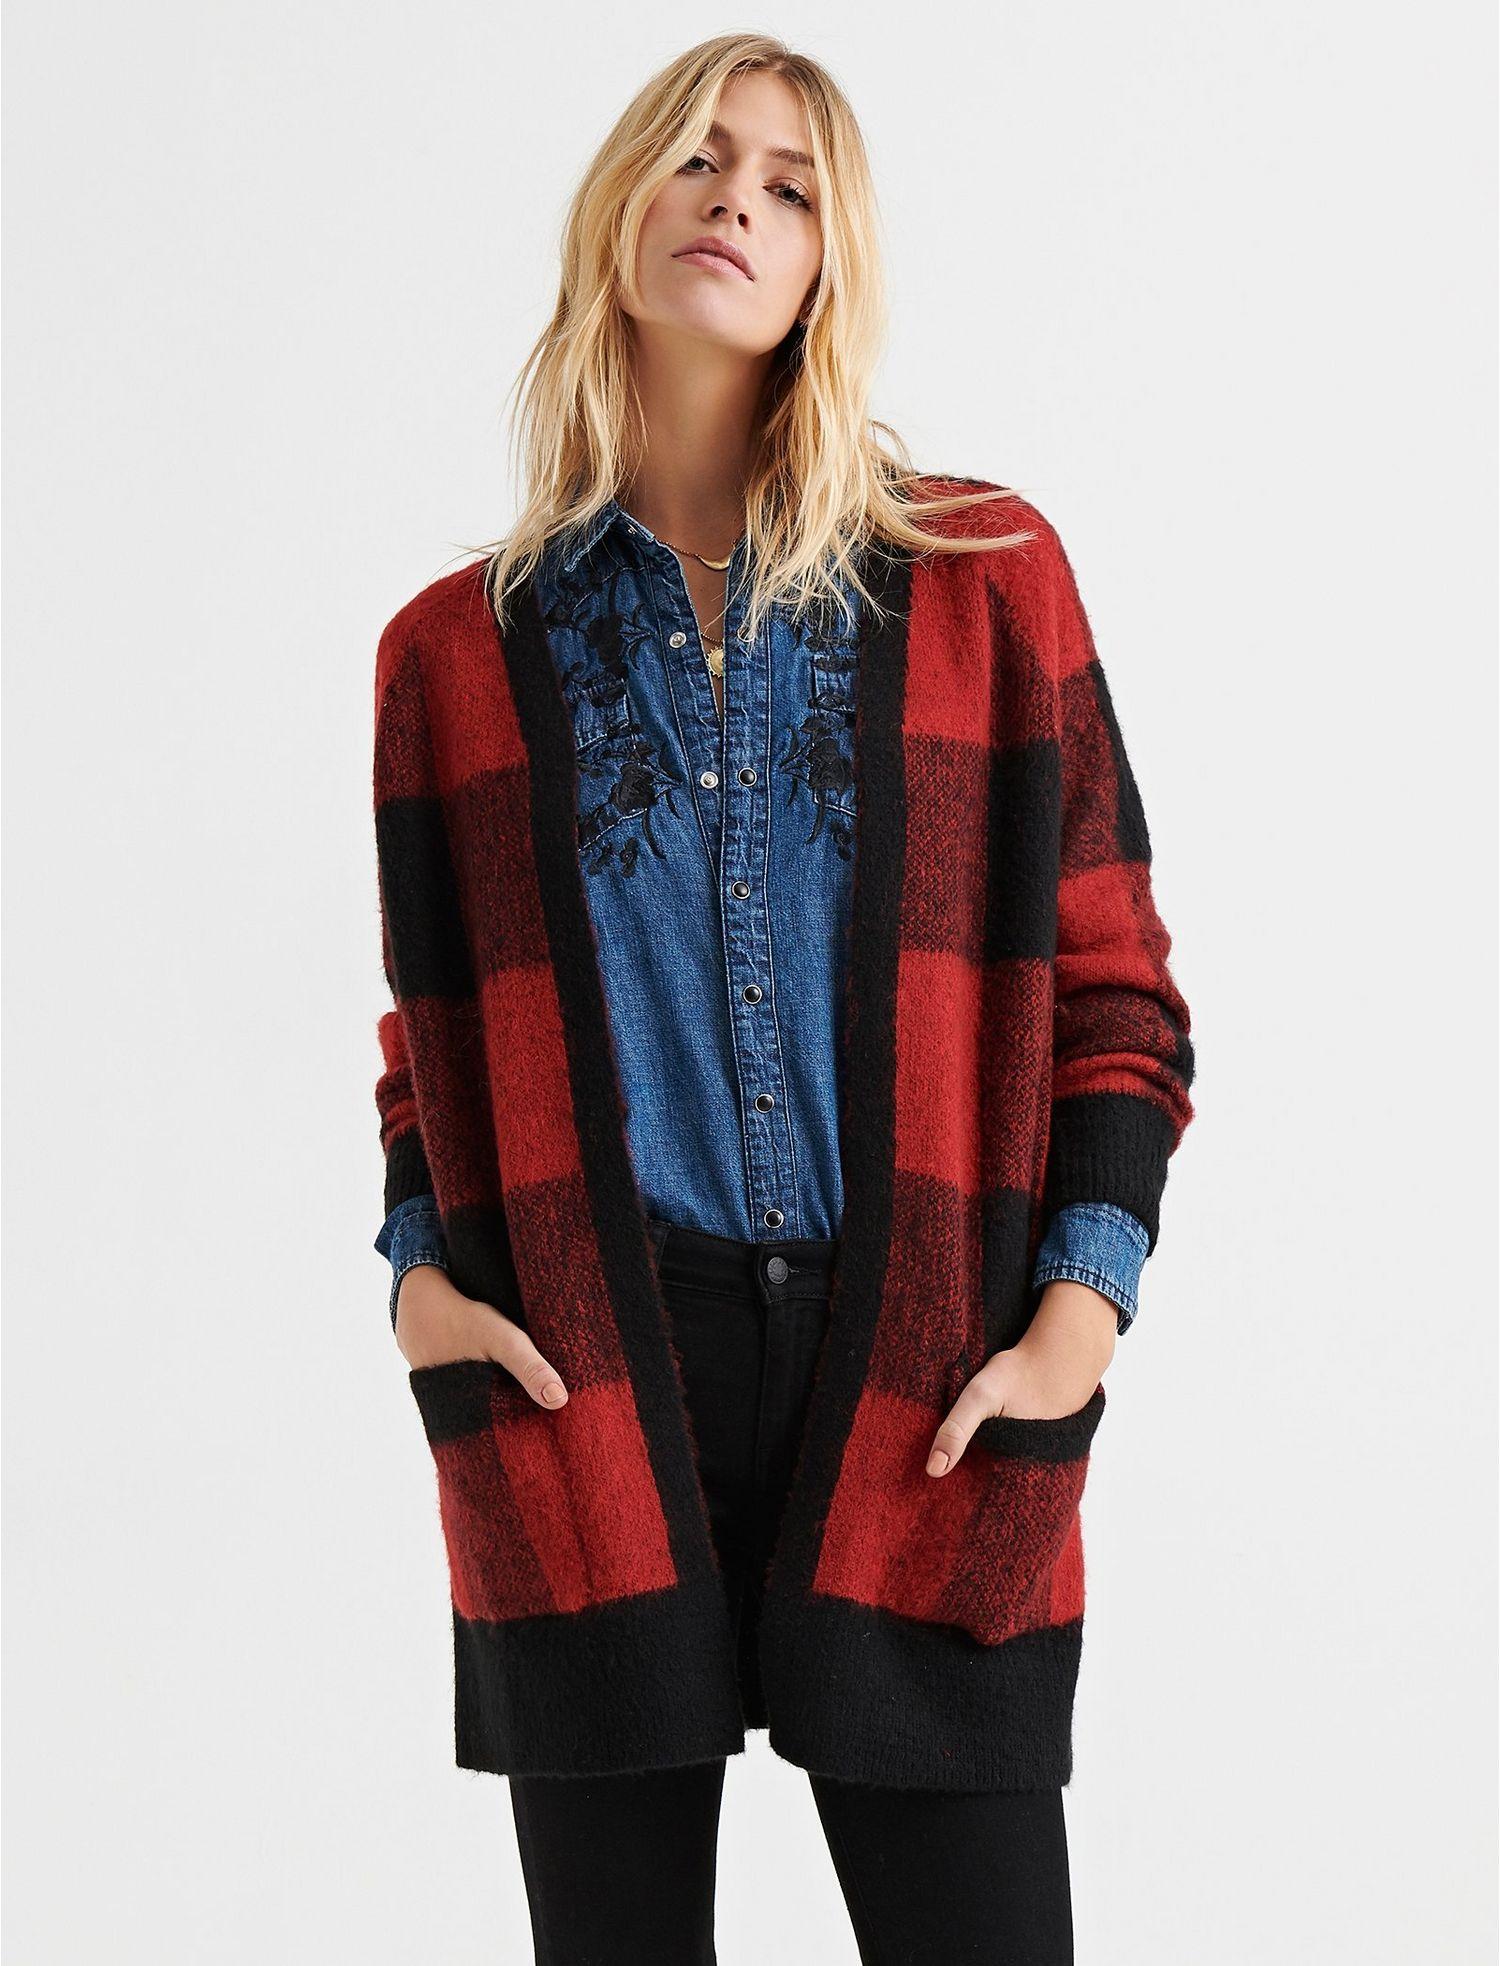 Lucky Brand Synthetic Buffalo Plaid Cardigan Sweater in Red - Lyst